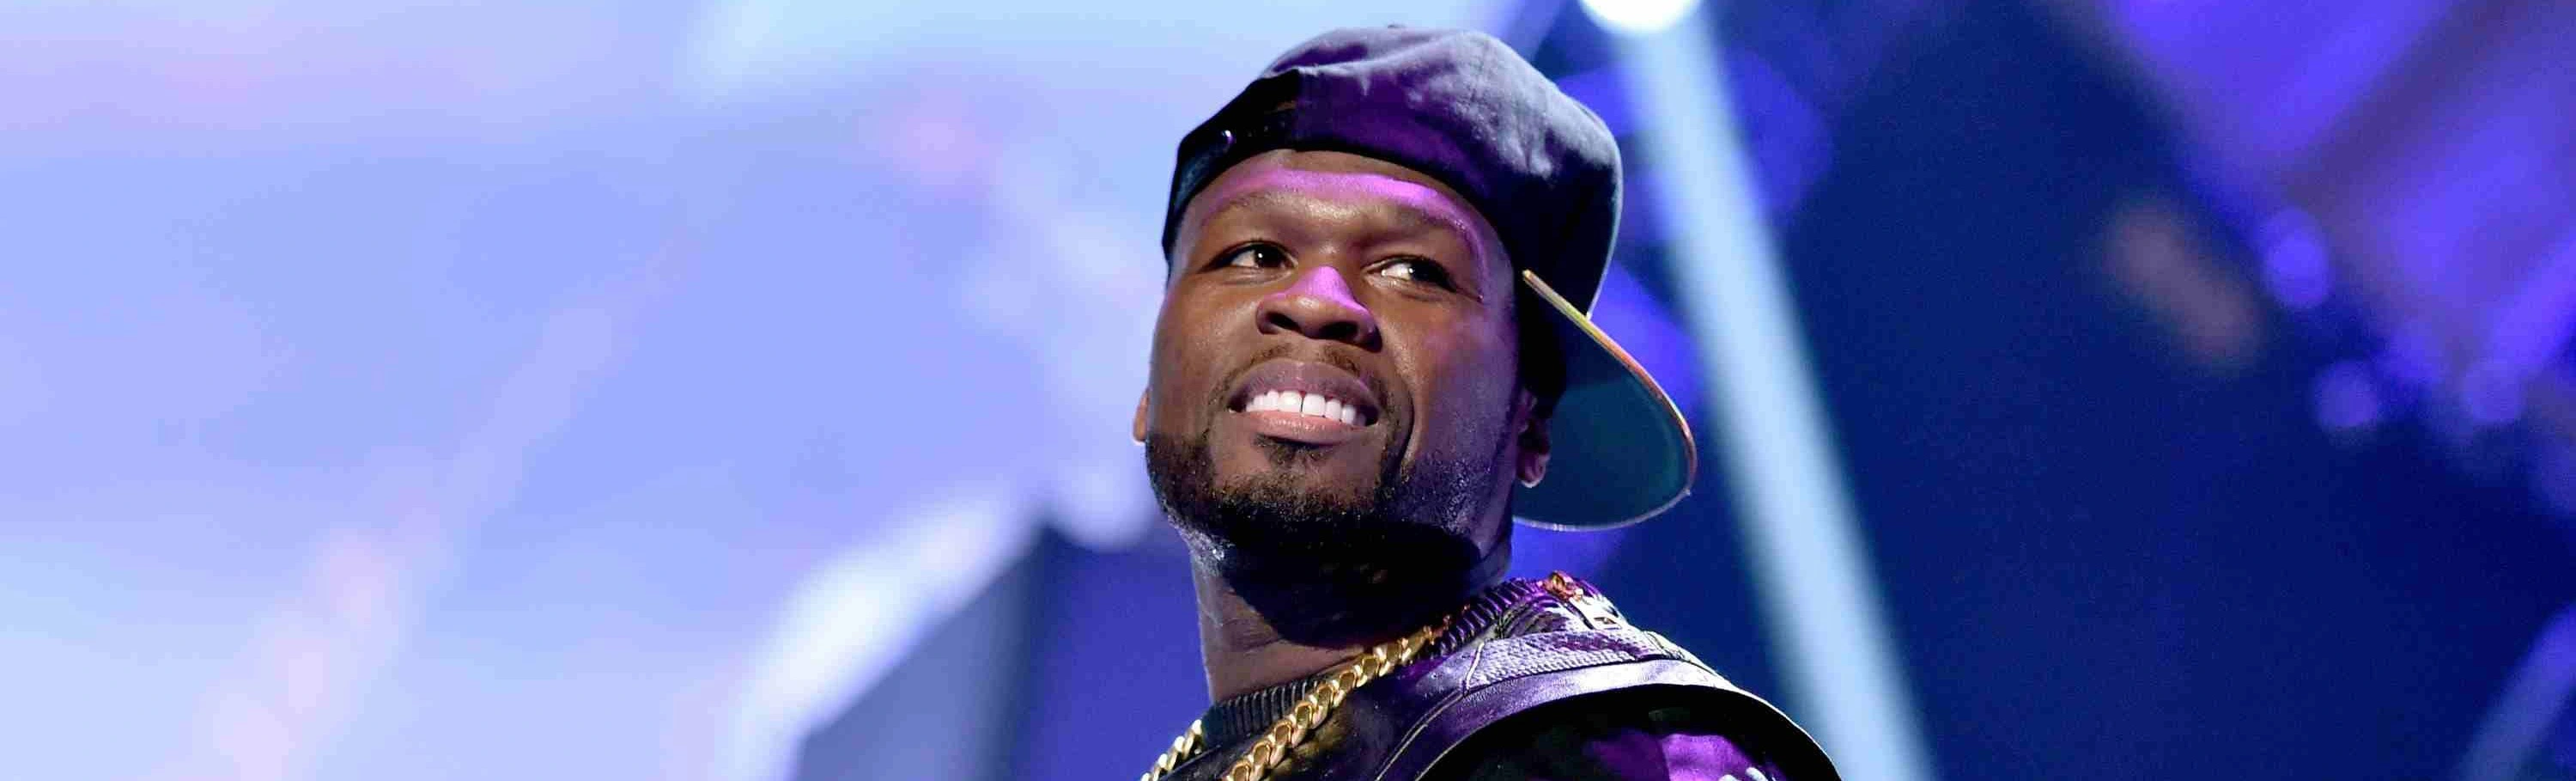 Don't miss the chance! 50 Cent Concert is a party that will blow up Al Dana Amphitheatre!